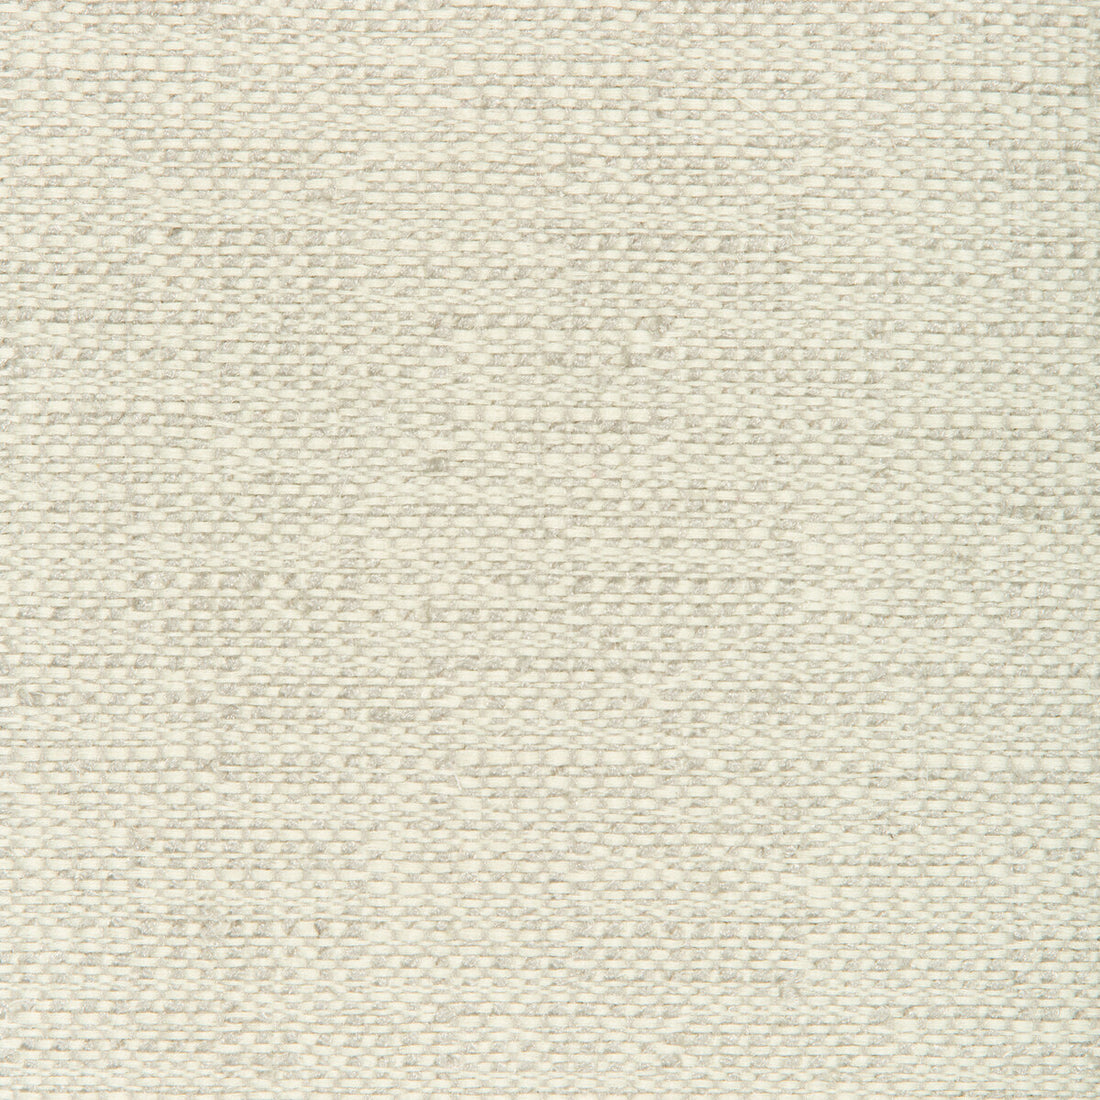 Kravet Contract fabric in 34635-11 color - pattern 34635.11.0 - by Kravet Contract in the Crypton Incase collection